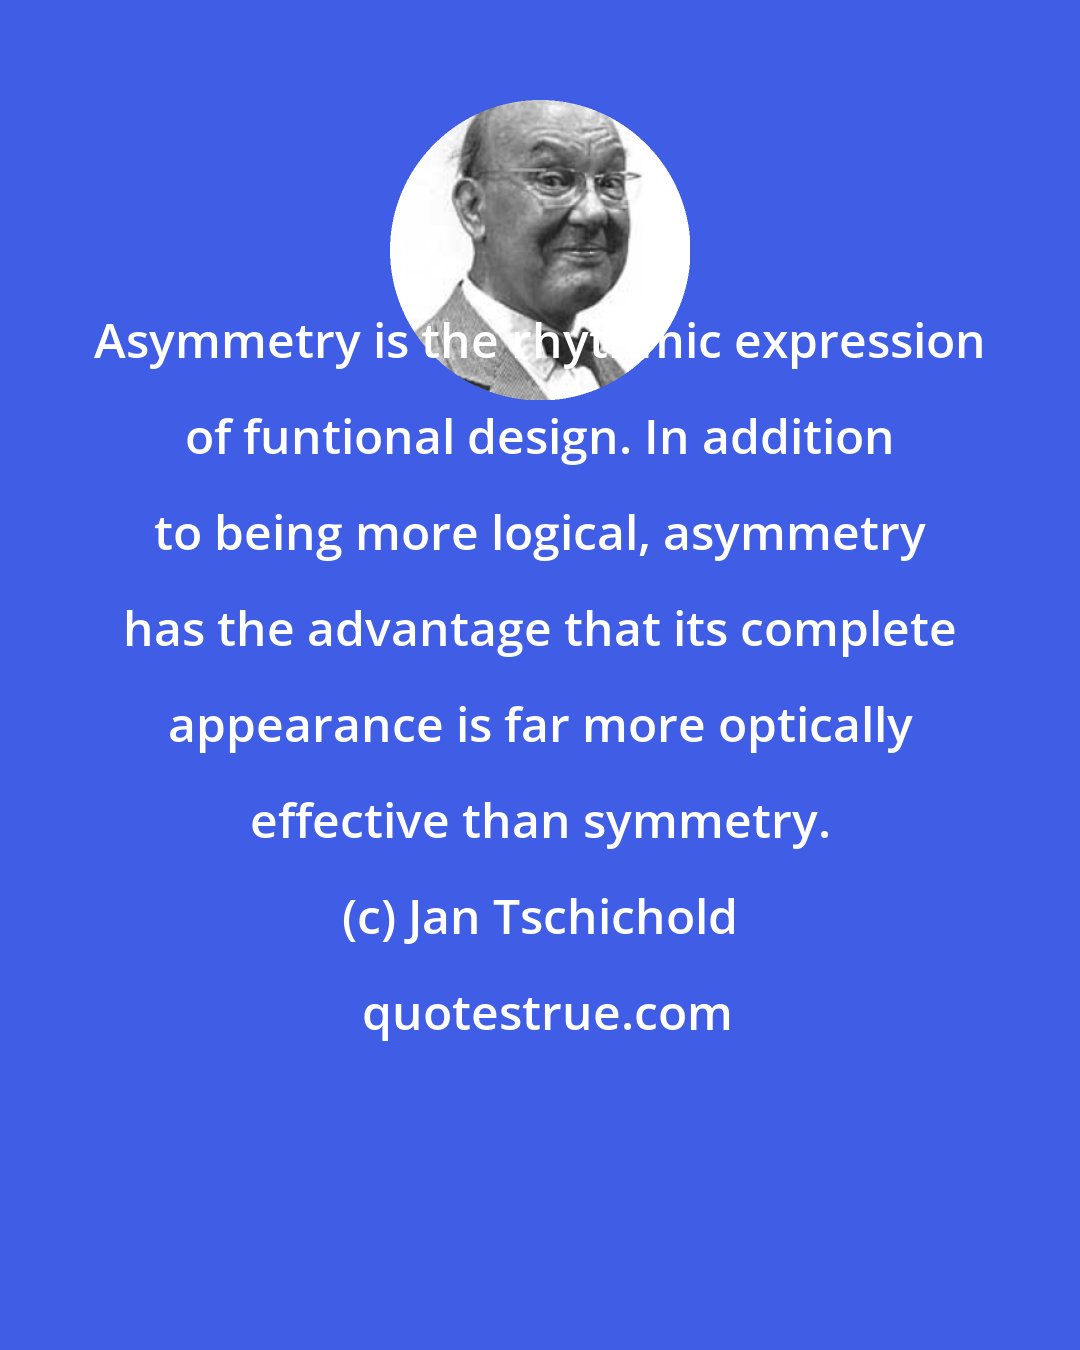 Jan Tschichold: Asymmetry is the rhythmic expression of funtional design. In addition to being more logical, asymmetry has the advantage that its complete appearance is far more optically effective than symmetry.